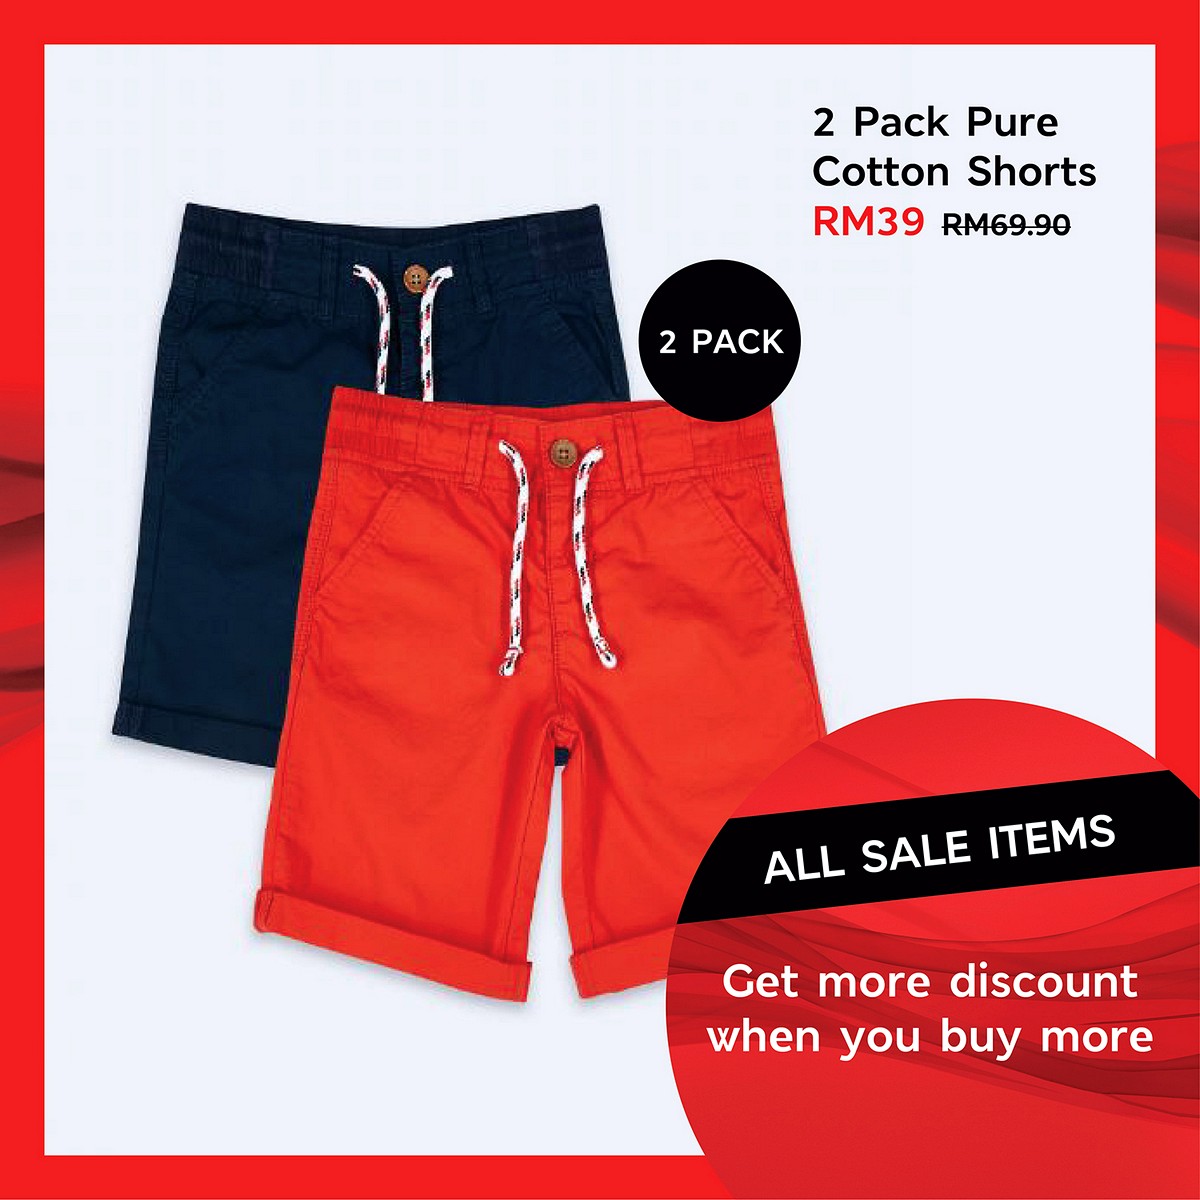 ESS-Extra-Discount_Social-Artwork-17 - Apparels Baby & Kids & Toys Children Fashion Fashion Accessories Fashion Lifestyle & Department Store Johor Kuala Lumpur Lingerie Nationwide Penang Selangor Sportswear Underwear Warehouse Sale & Clearance in Malaysia 